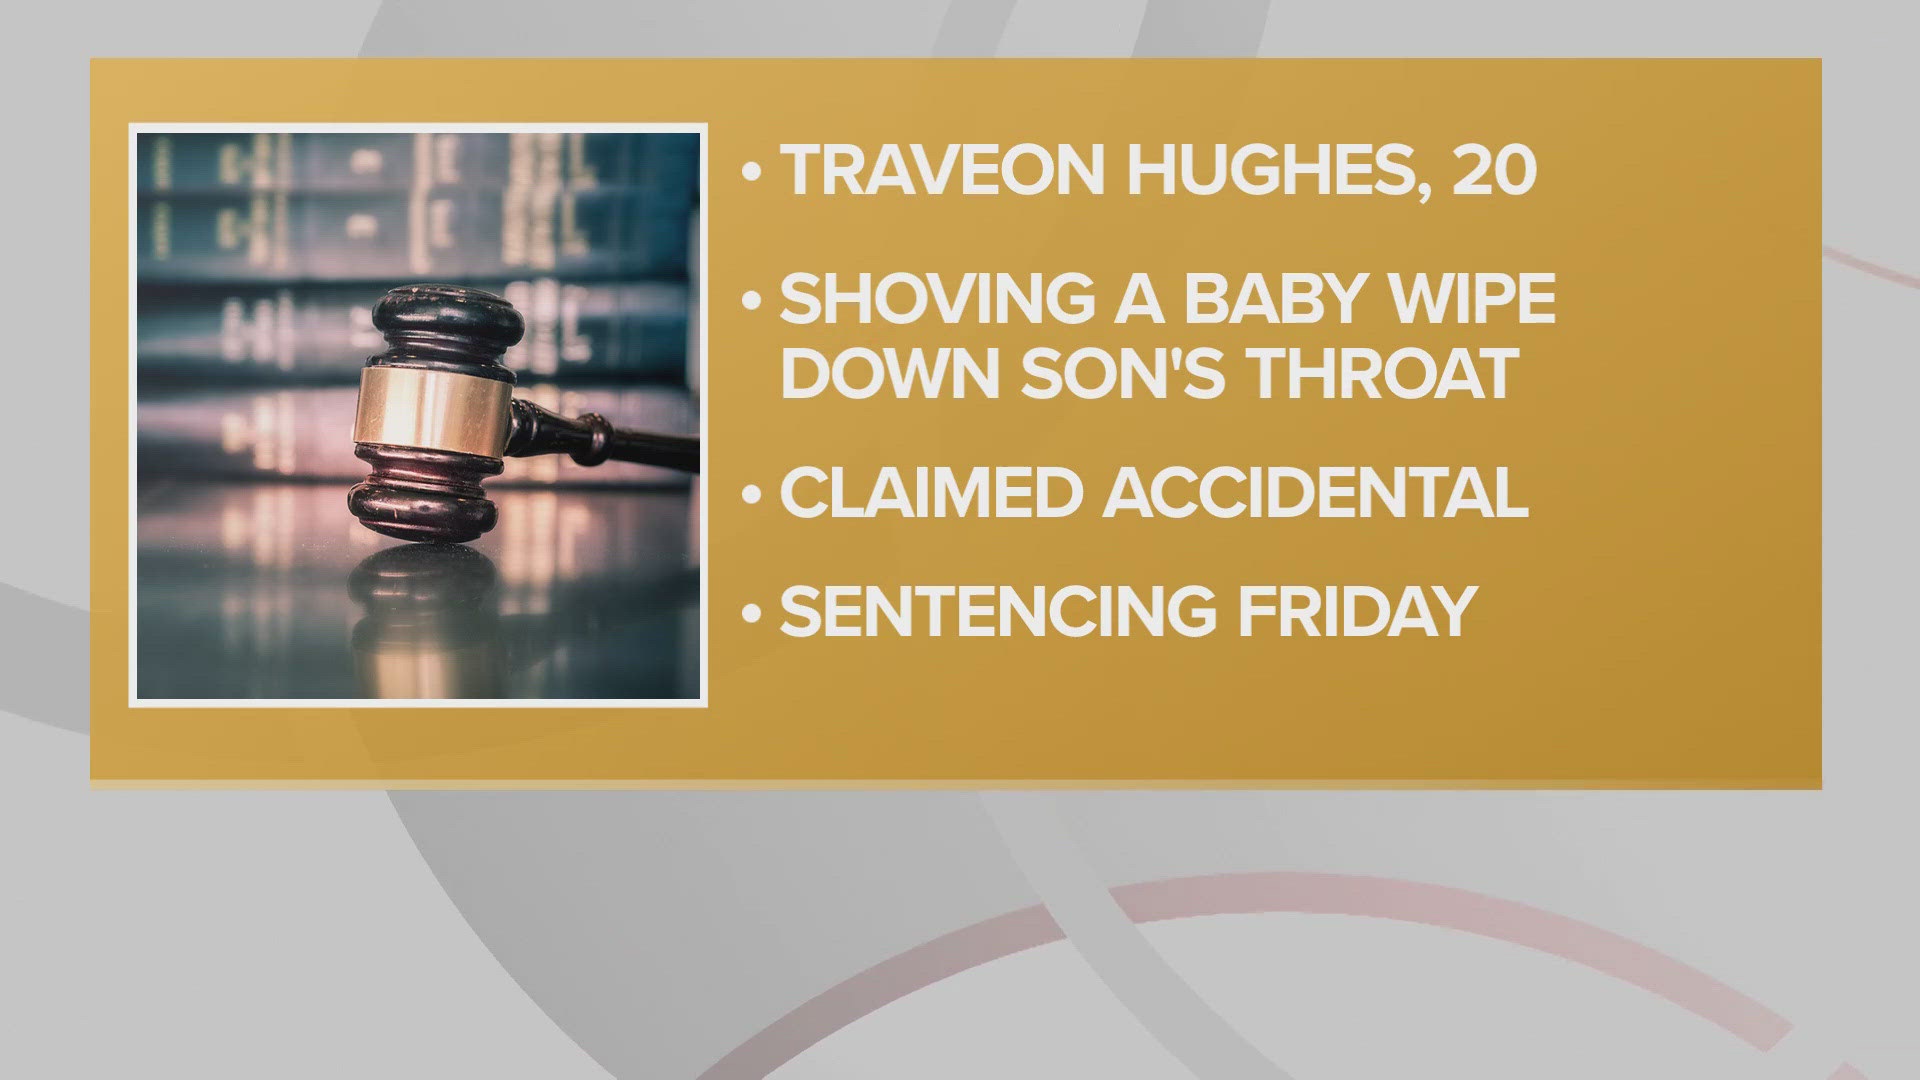 Traveon Hughes claimed he placed the wipe on the infant, who then swallowed it himself.